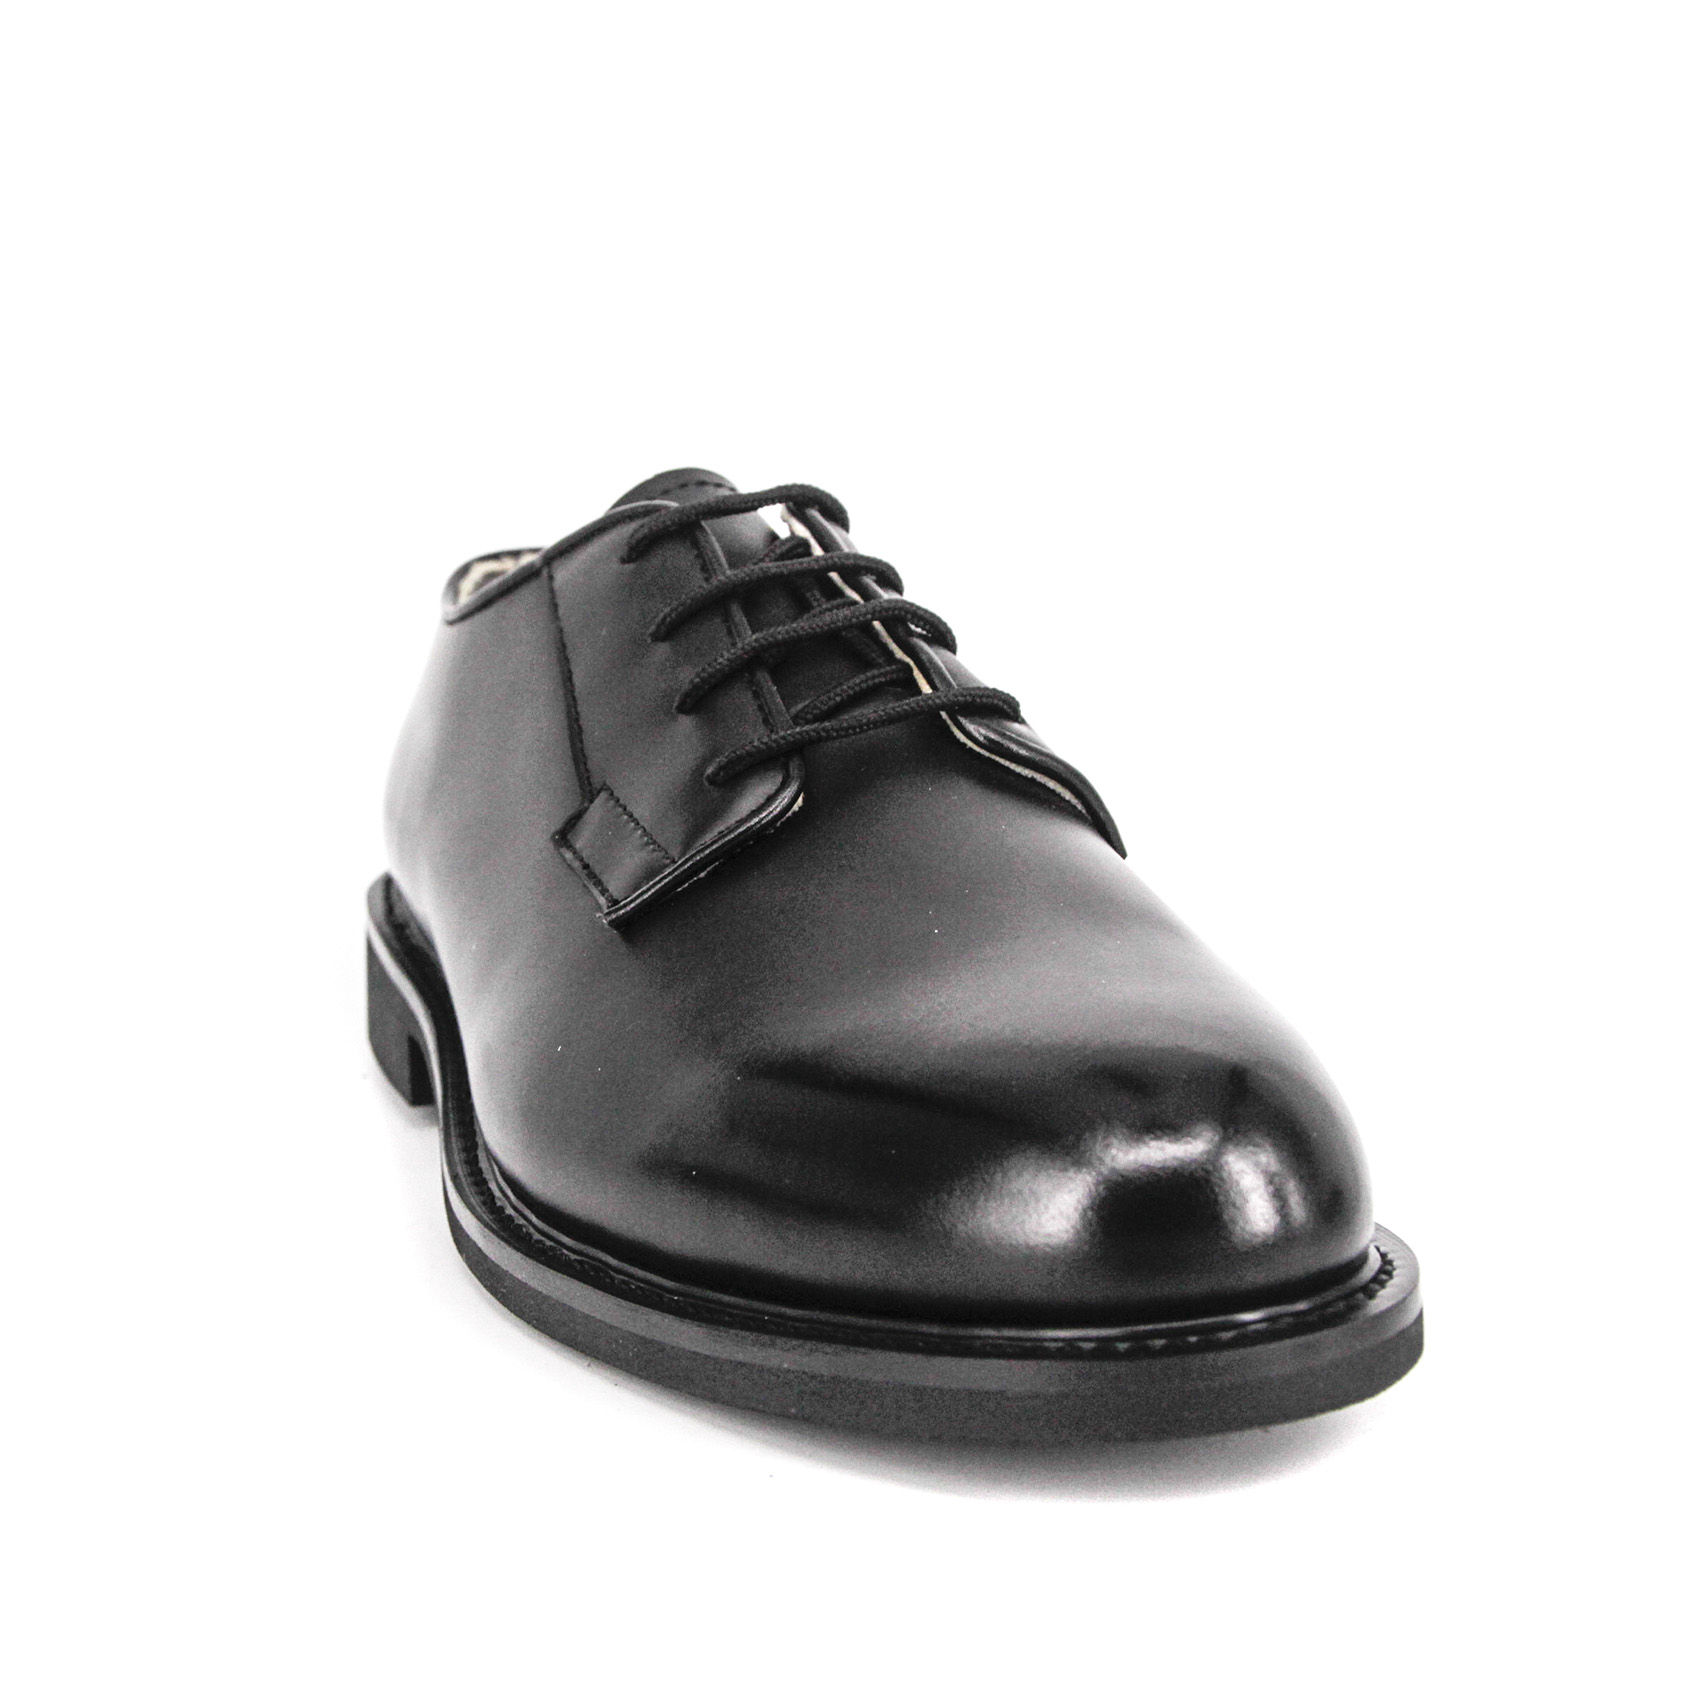 MILFORCE Custom Latest Style Hot Selling Business Office Oxford Shoes Men dress calceus